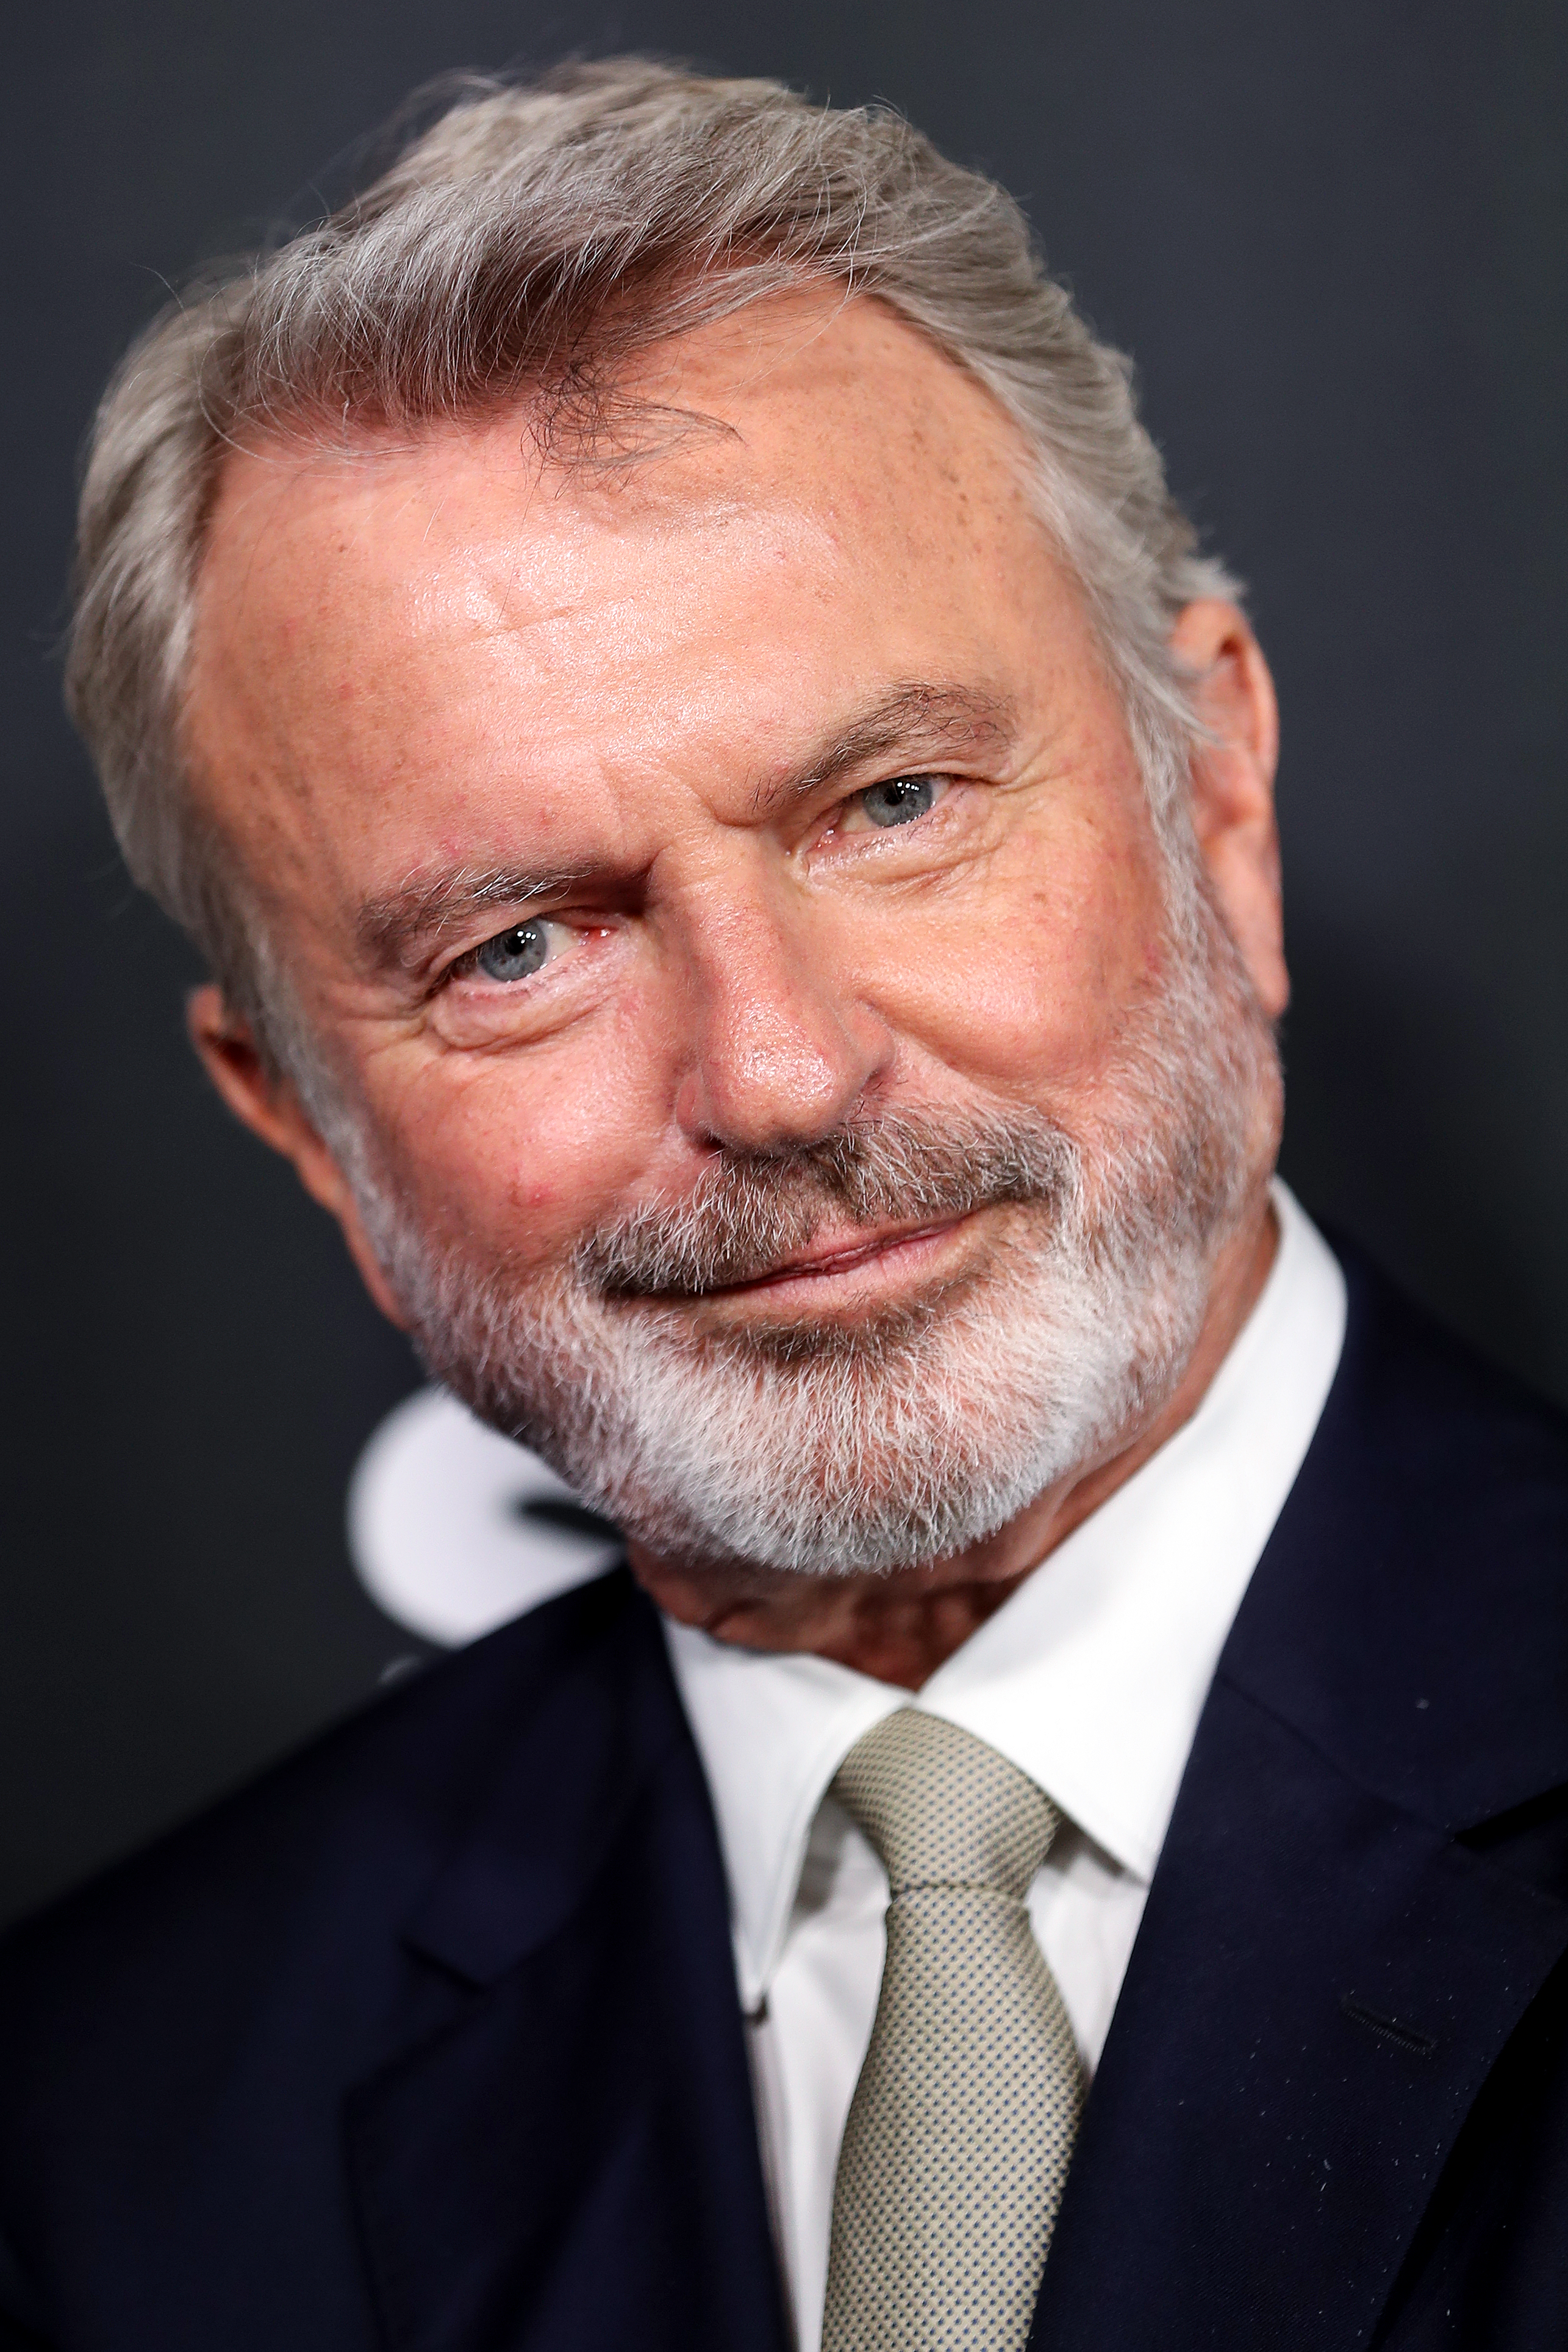 Sam Neill attends the world premiere of "The Portable Door" at Hoyts Entertainment Quarter on March 23, 2023 in Sydney, Australia. | Source: Getty Images